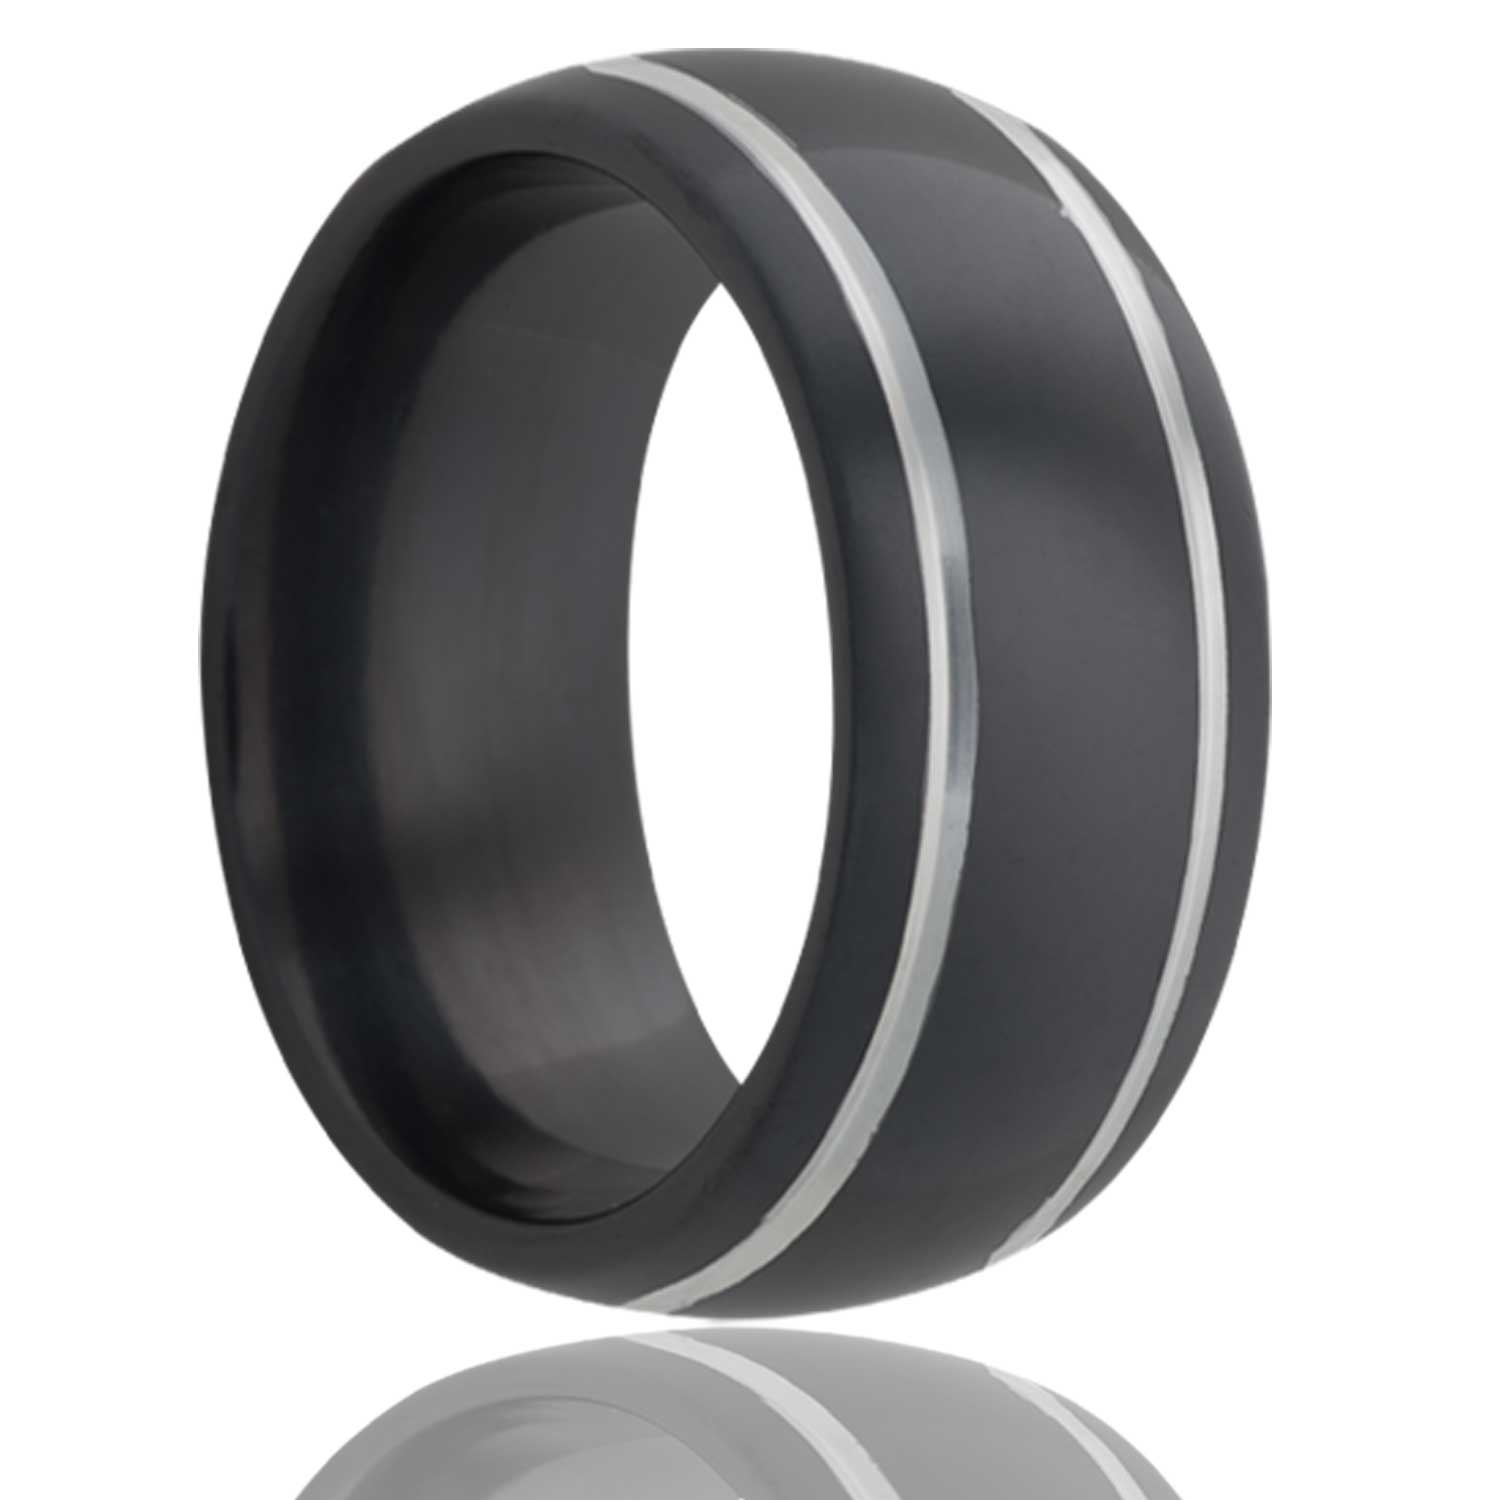 A domed zirconium wedding band with grooved edges displayed on a neutral white background.